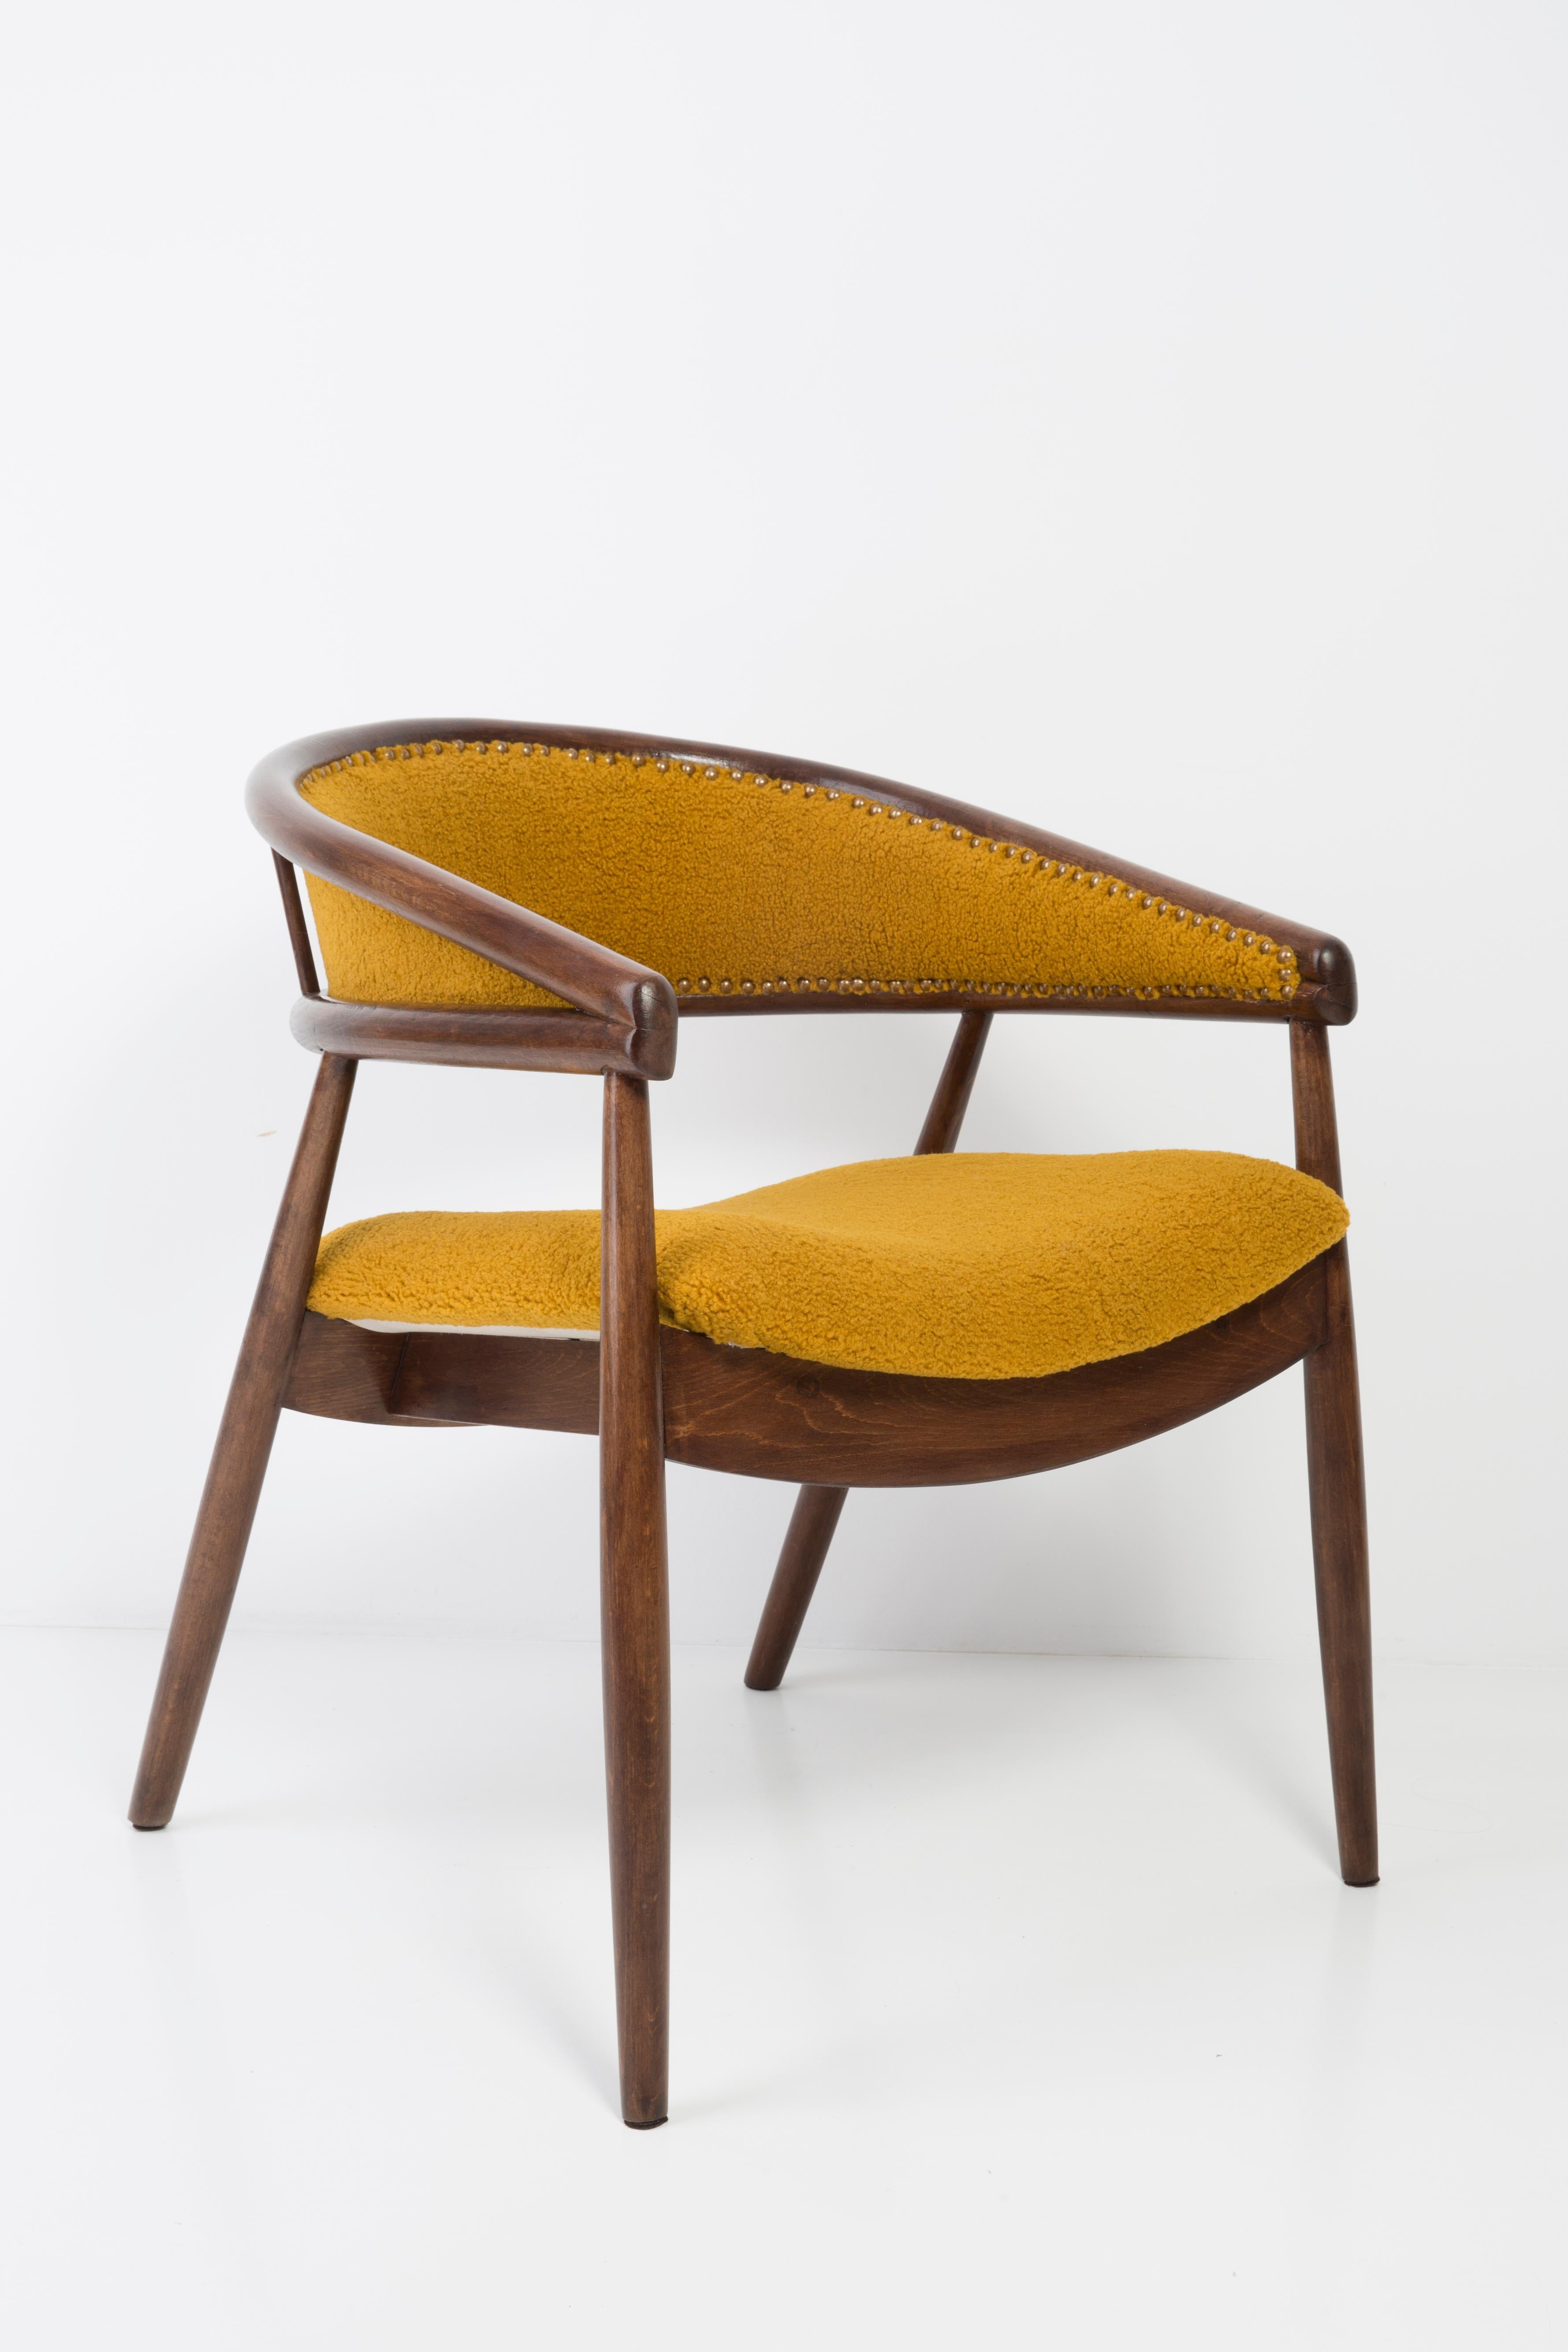 Set of Two James Mont Bent Beech Armchairs, Yellow Ochra Boucle, 1960s In Excellent Condition For Sale In 05-080 Hornowek, PL